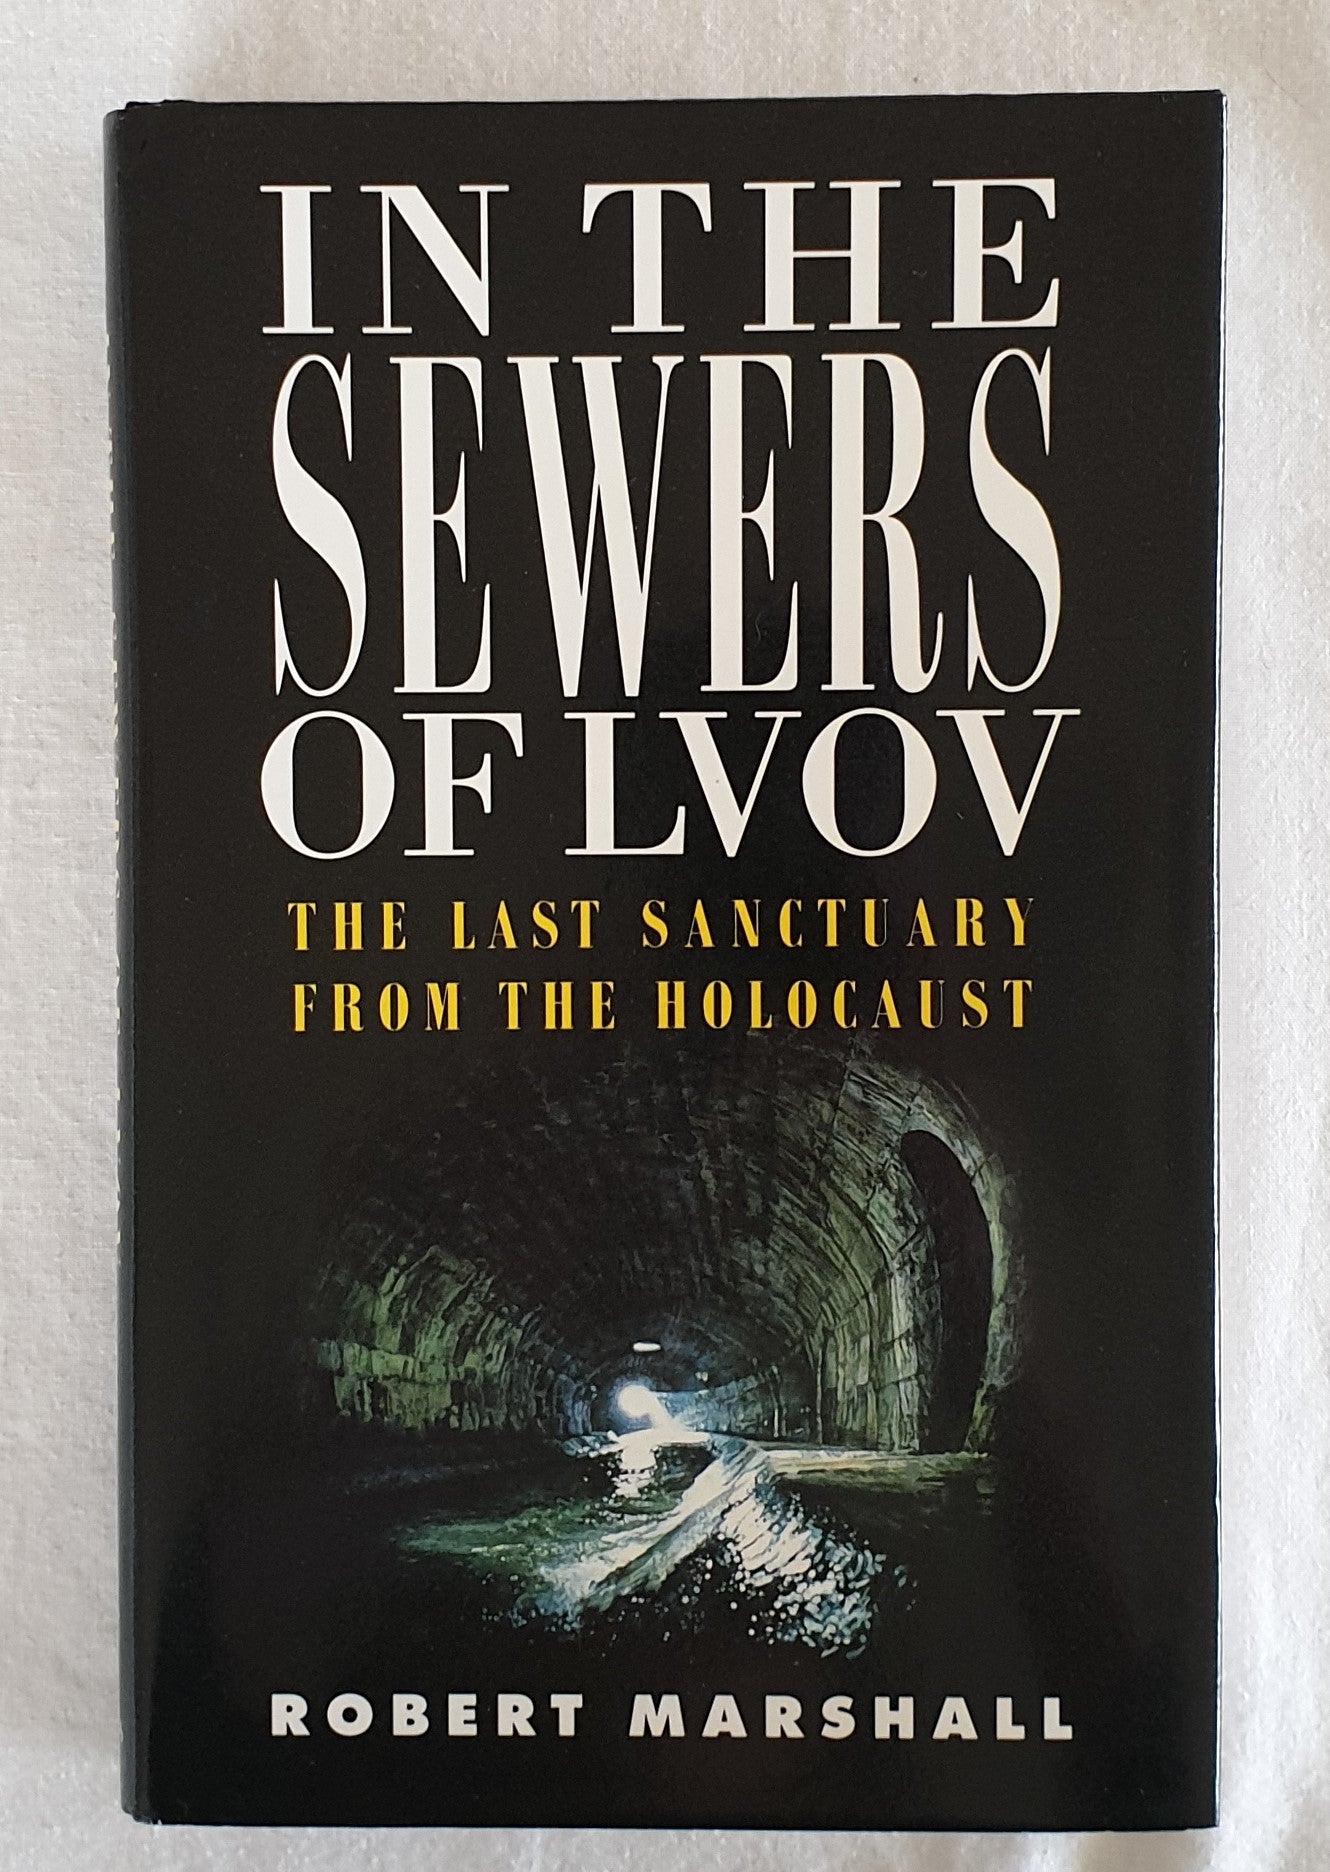 In The Sewers of Lvov  The Last Sanctuary from the Holocaust  by Robert Marshall